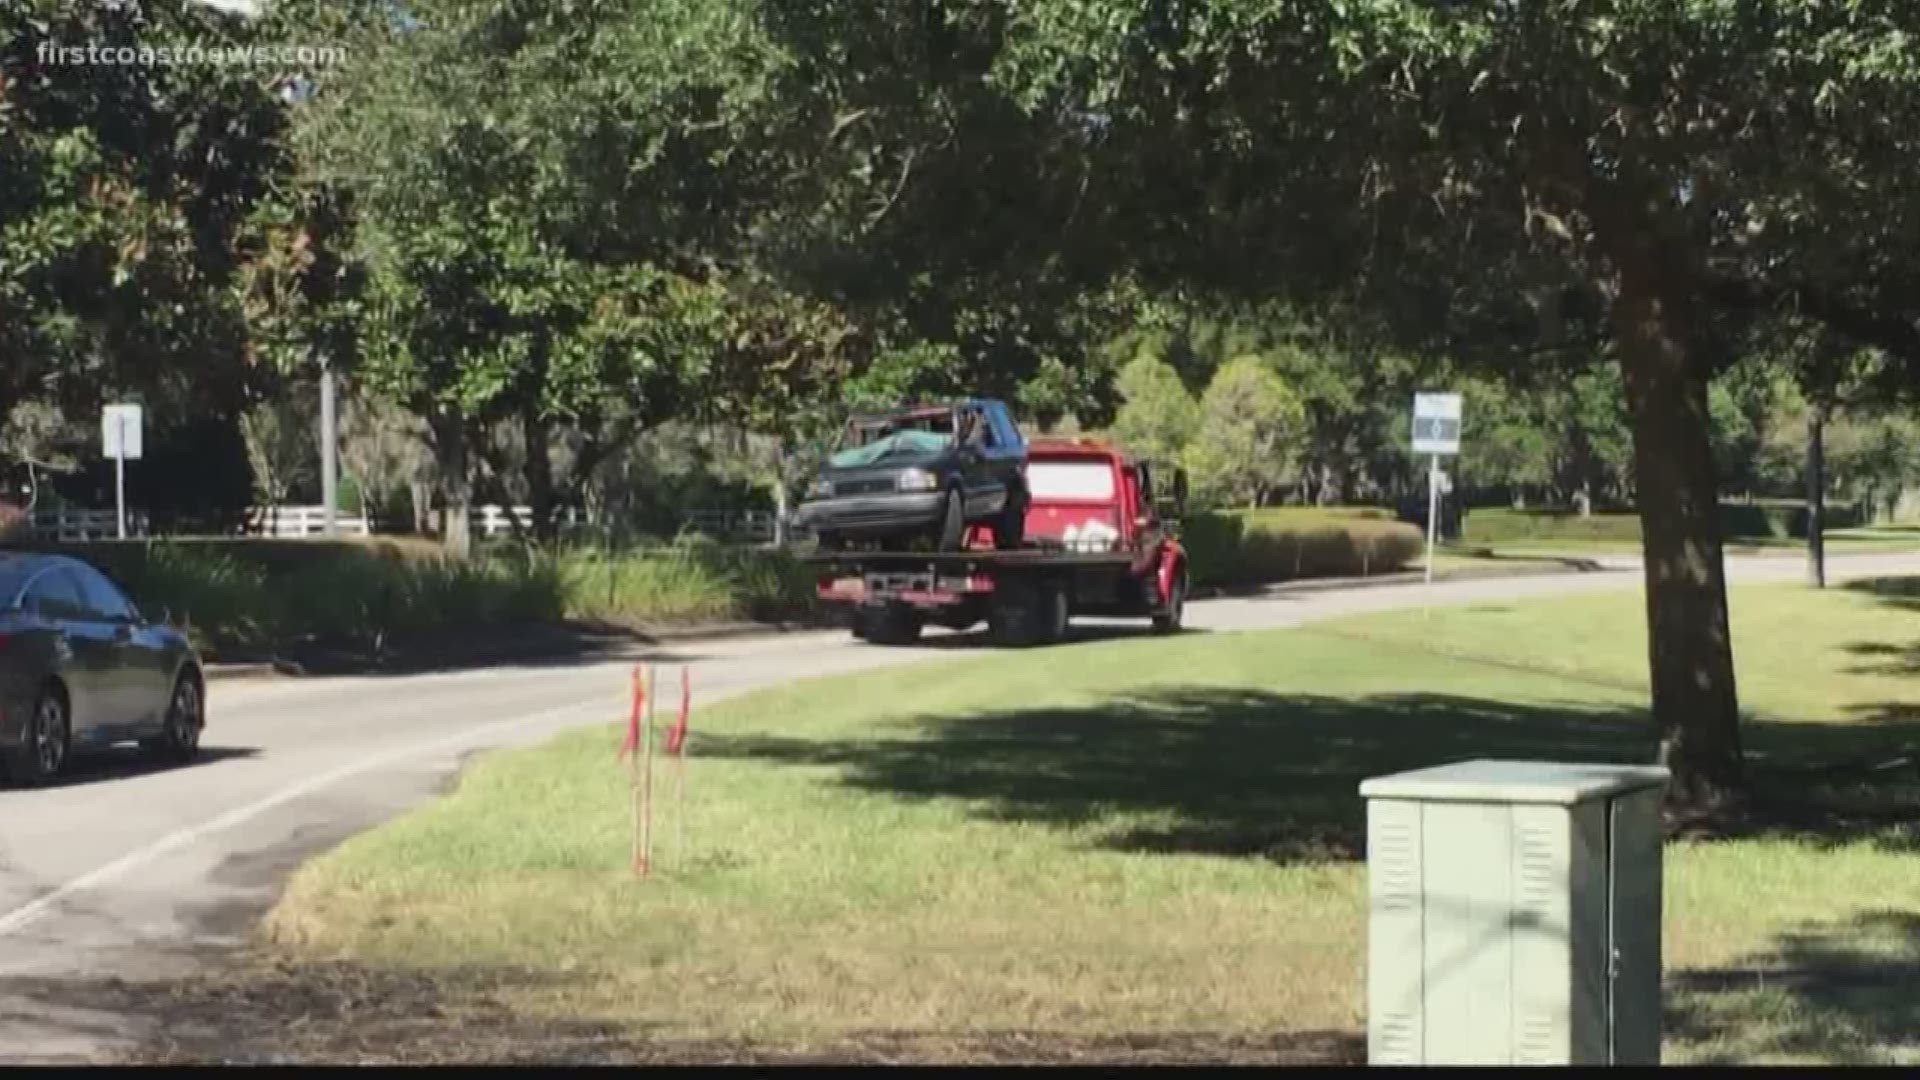 The teen drove himself to the bus stop daily and because he was on private property no laws were broken, investigators say.